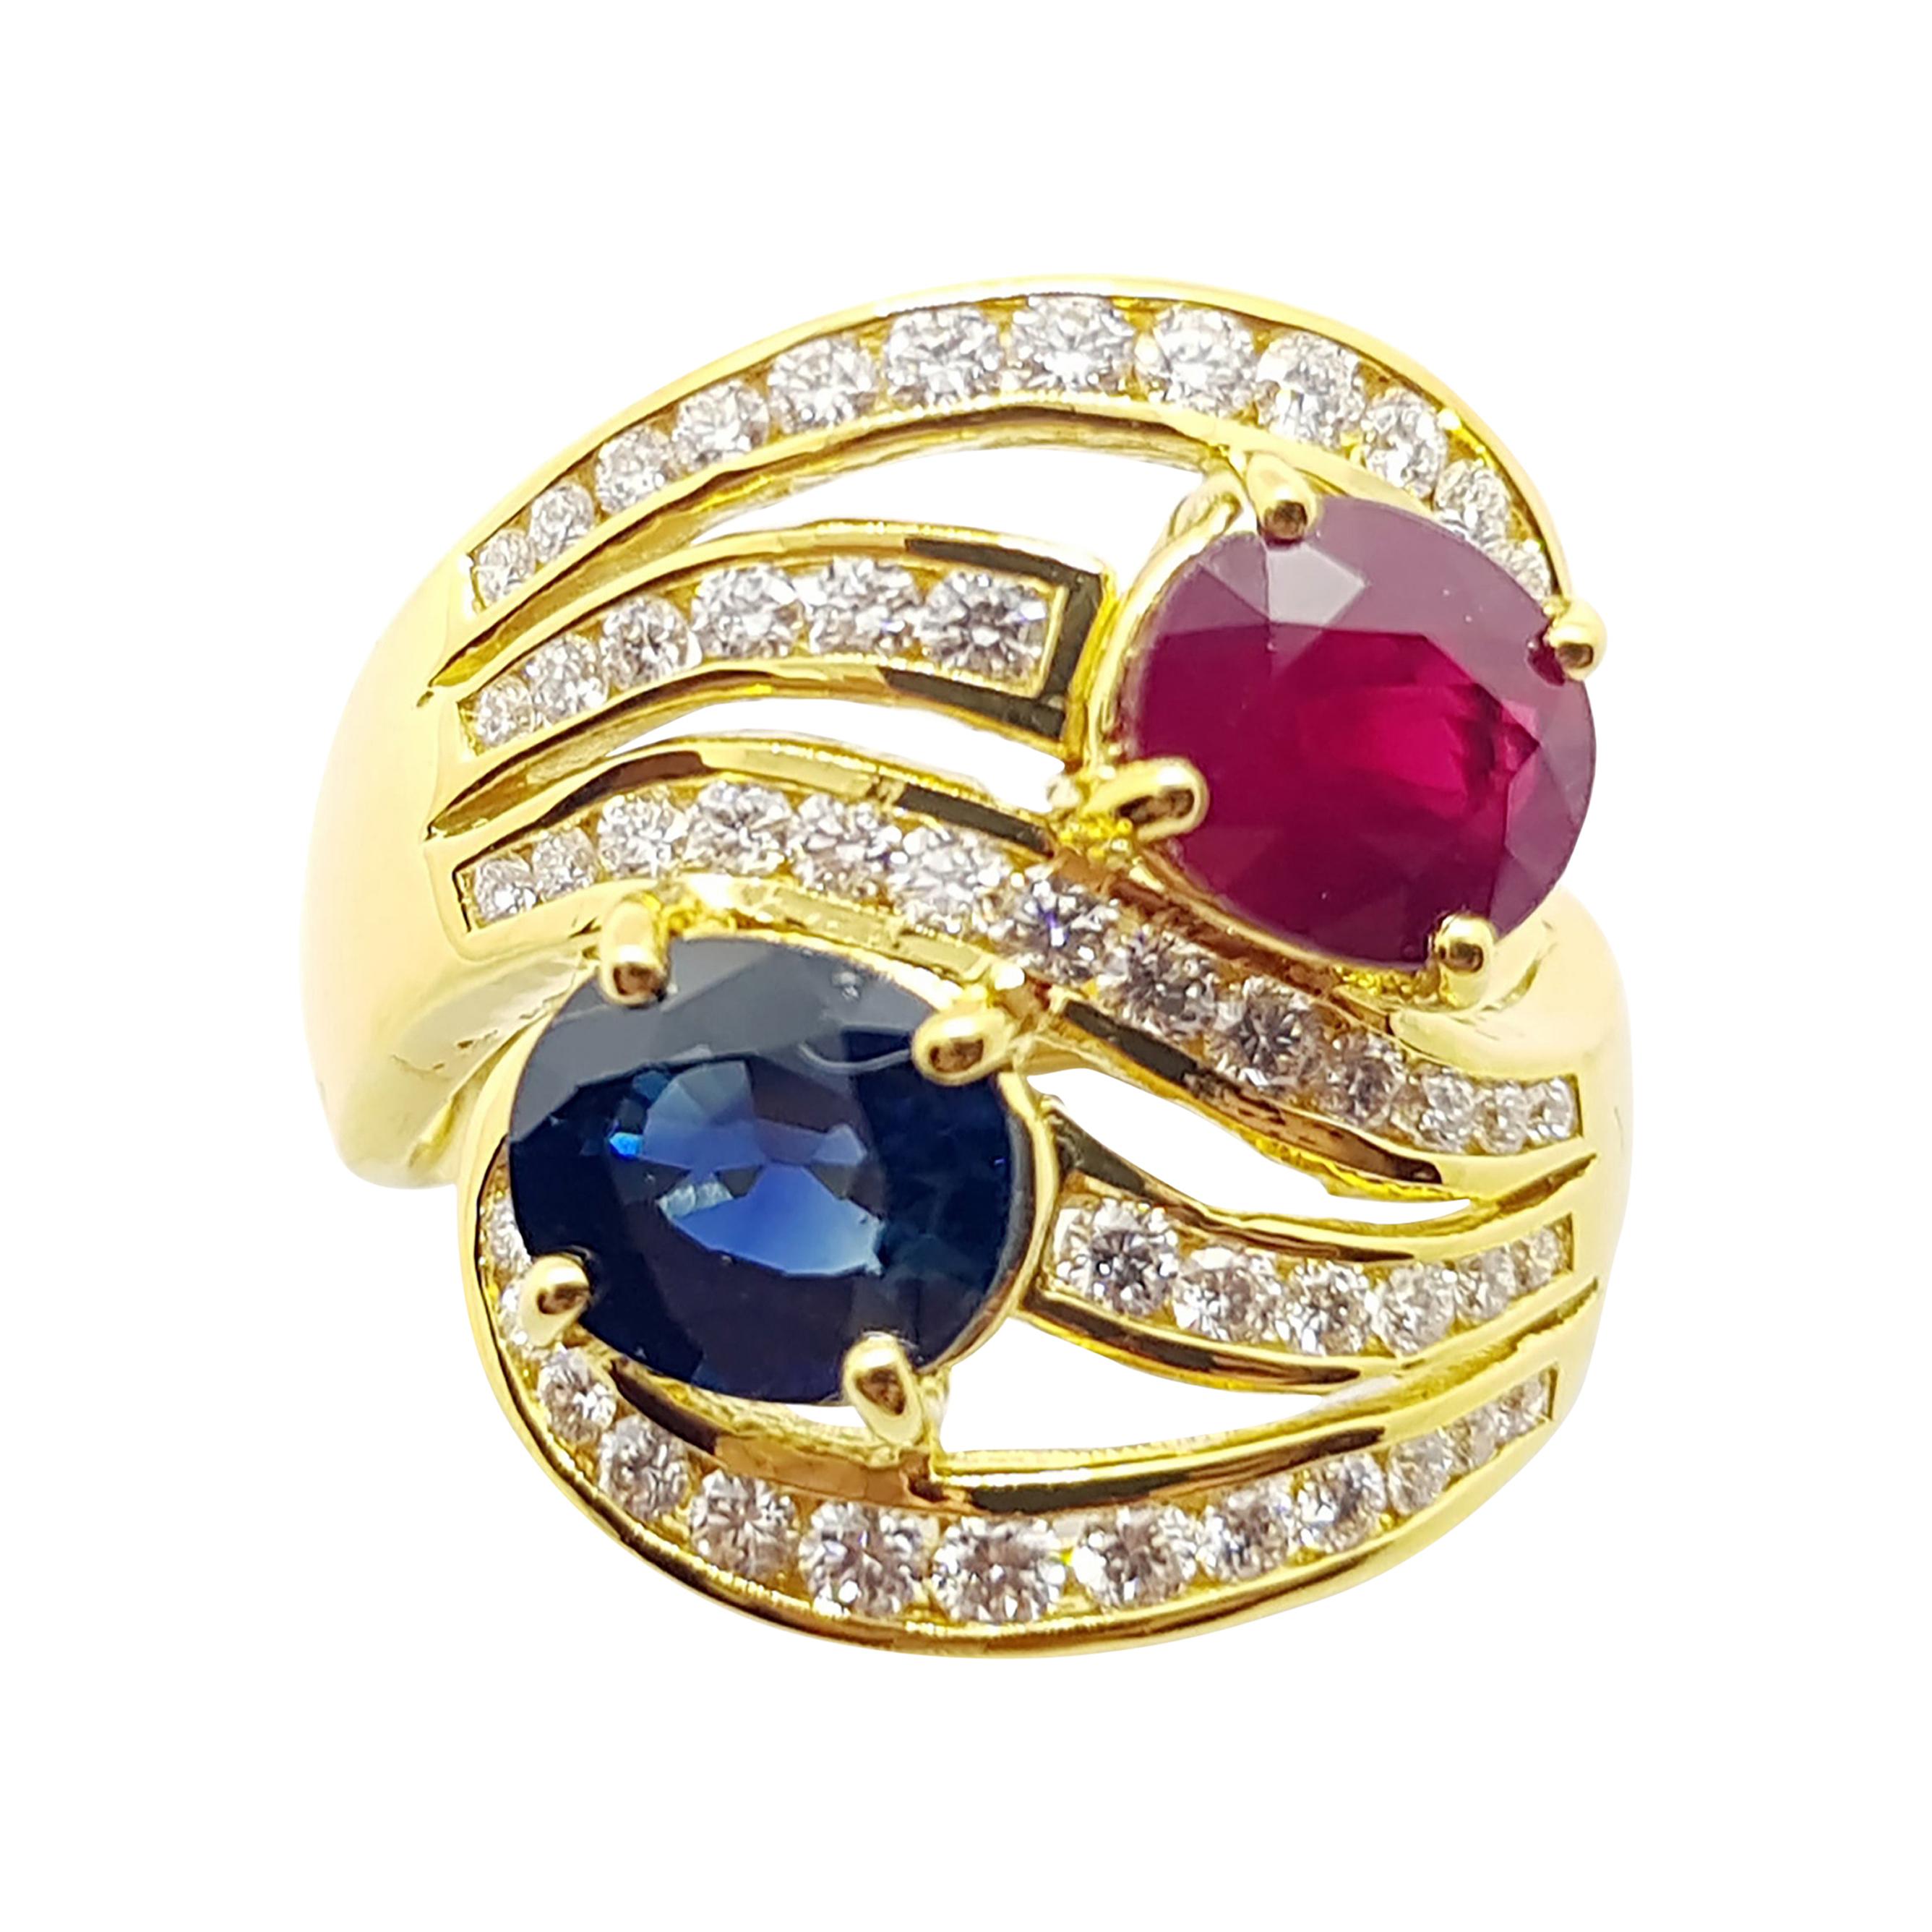 Blue Sapphire and Ruby with Diamond Ring Set in 18 Karat Gold Settings